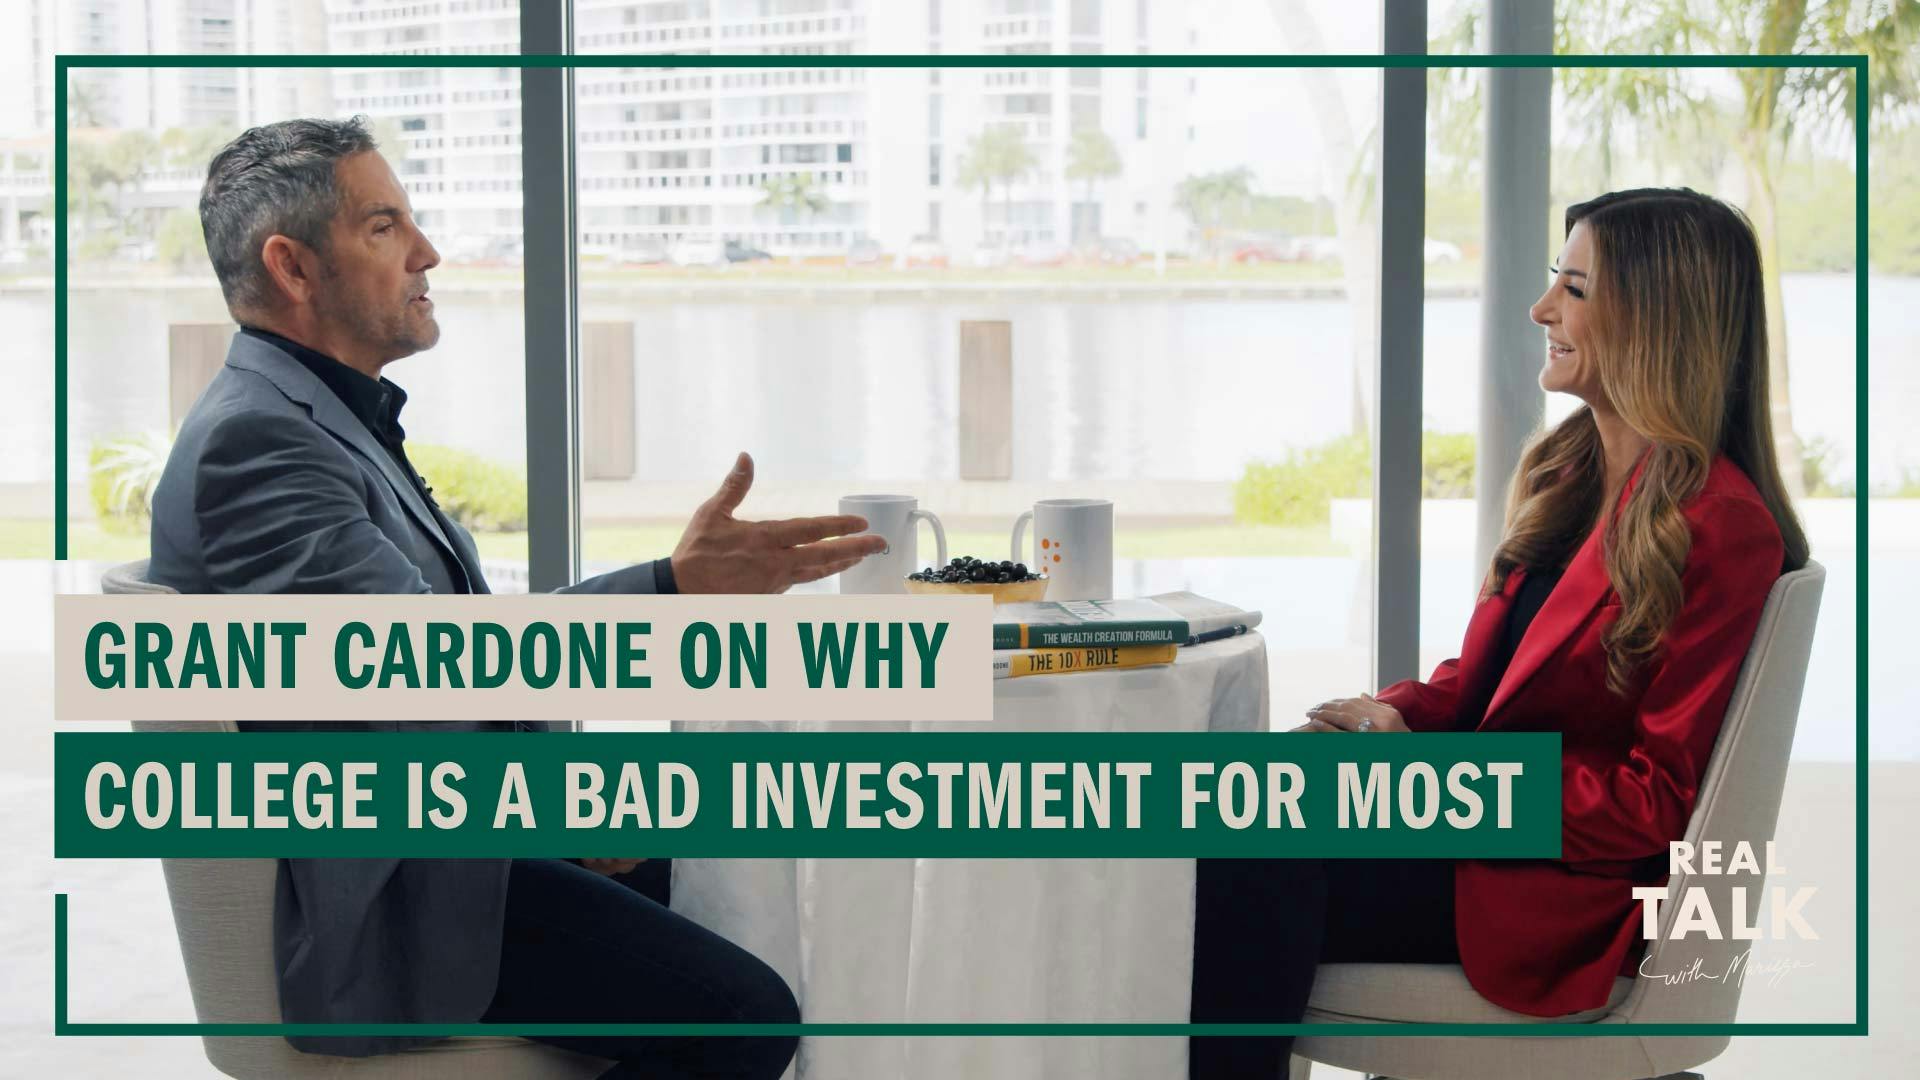 Grant Cardone on Why College Is a Bad Investment for Most